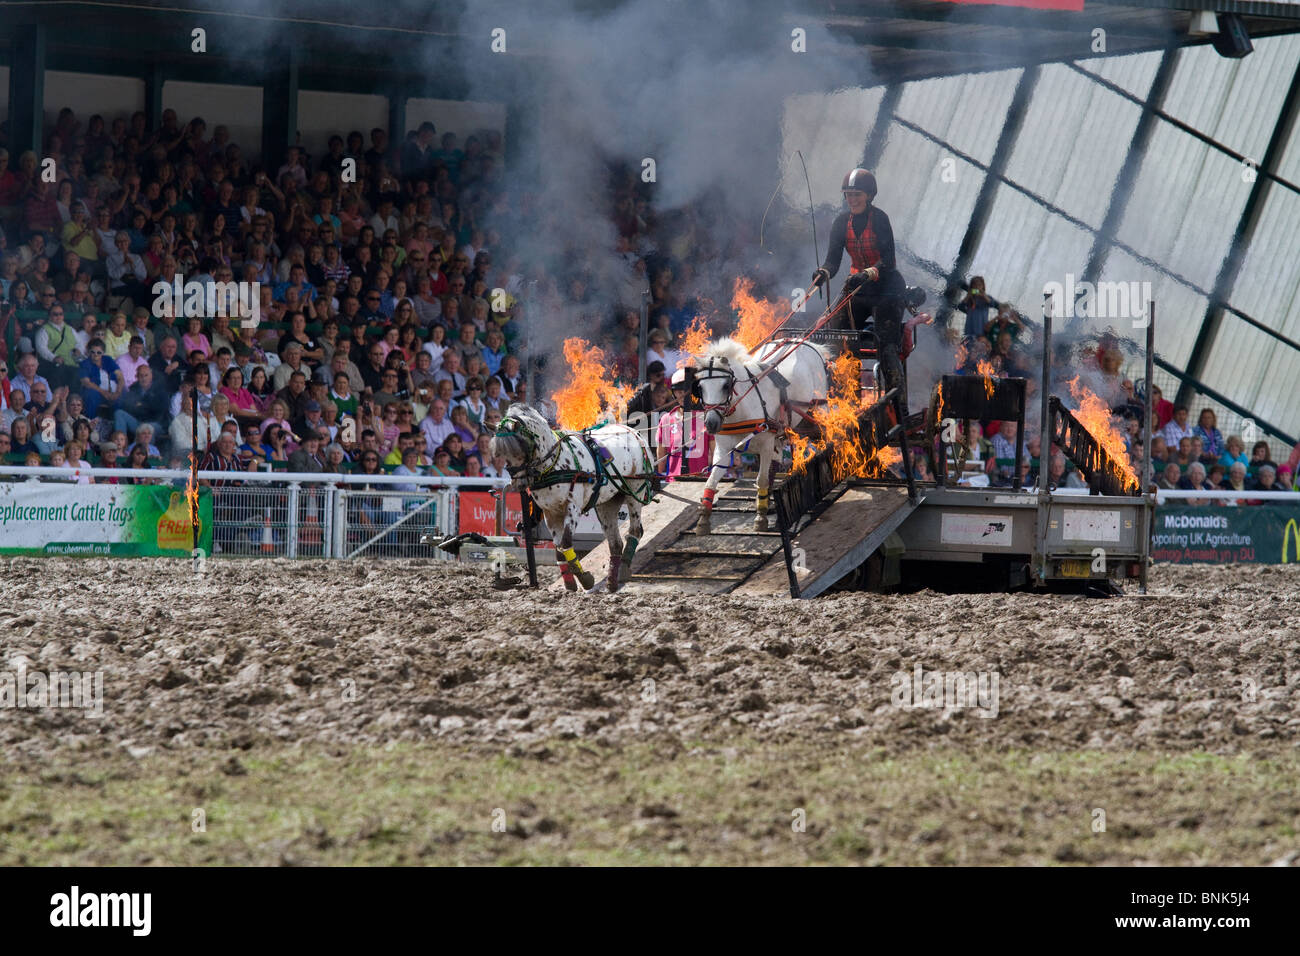 Chariots of fire horse display at the Royal Welsh show in Bridgend, Wales Stock Photo